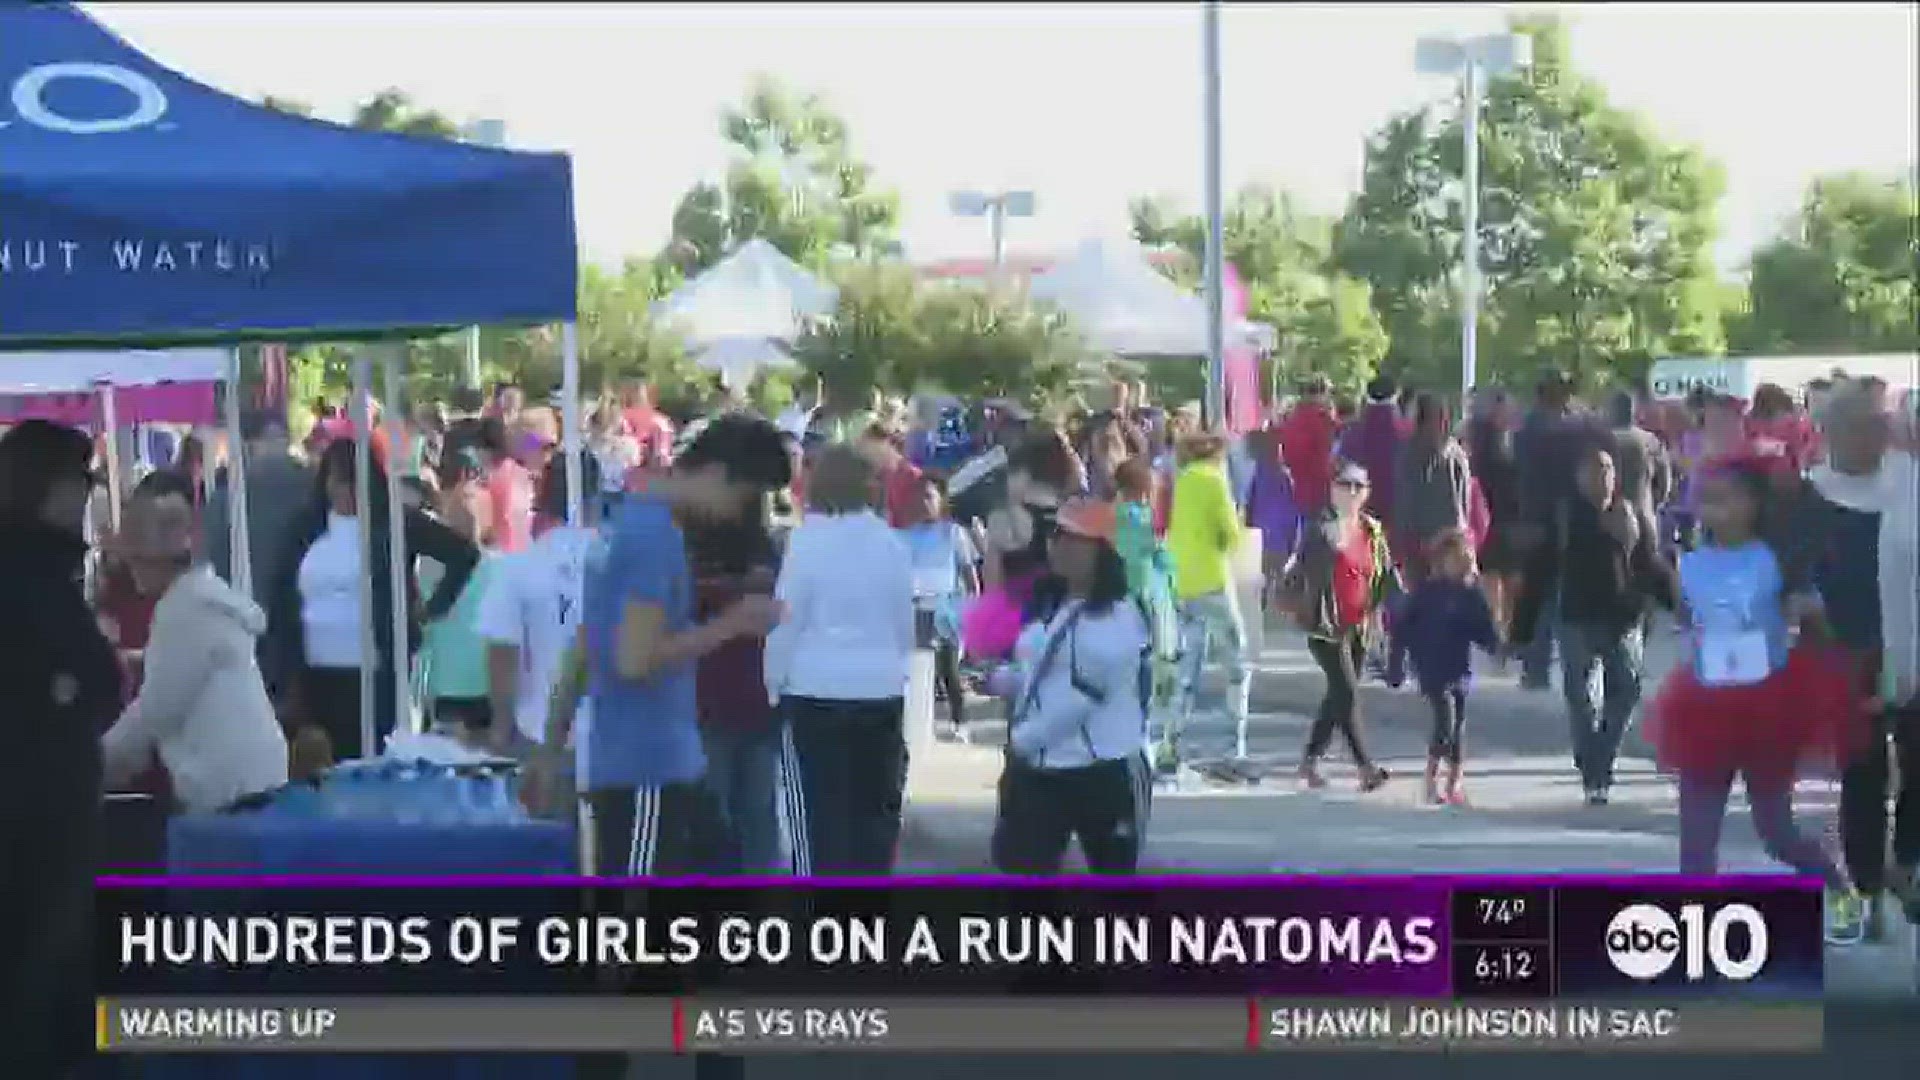 Girls go on run in Natomas to promote confidence and health. (May 14, 2016)